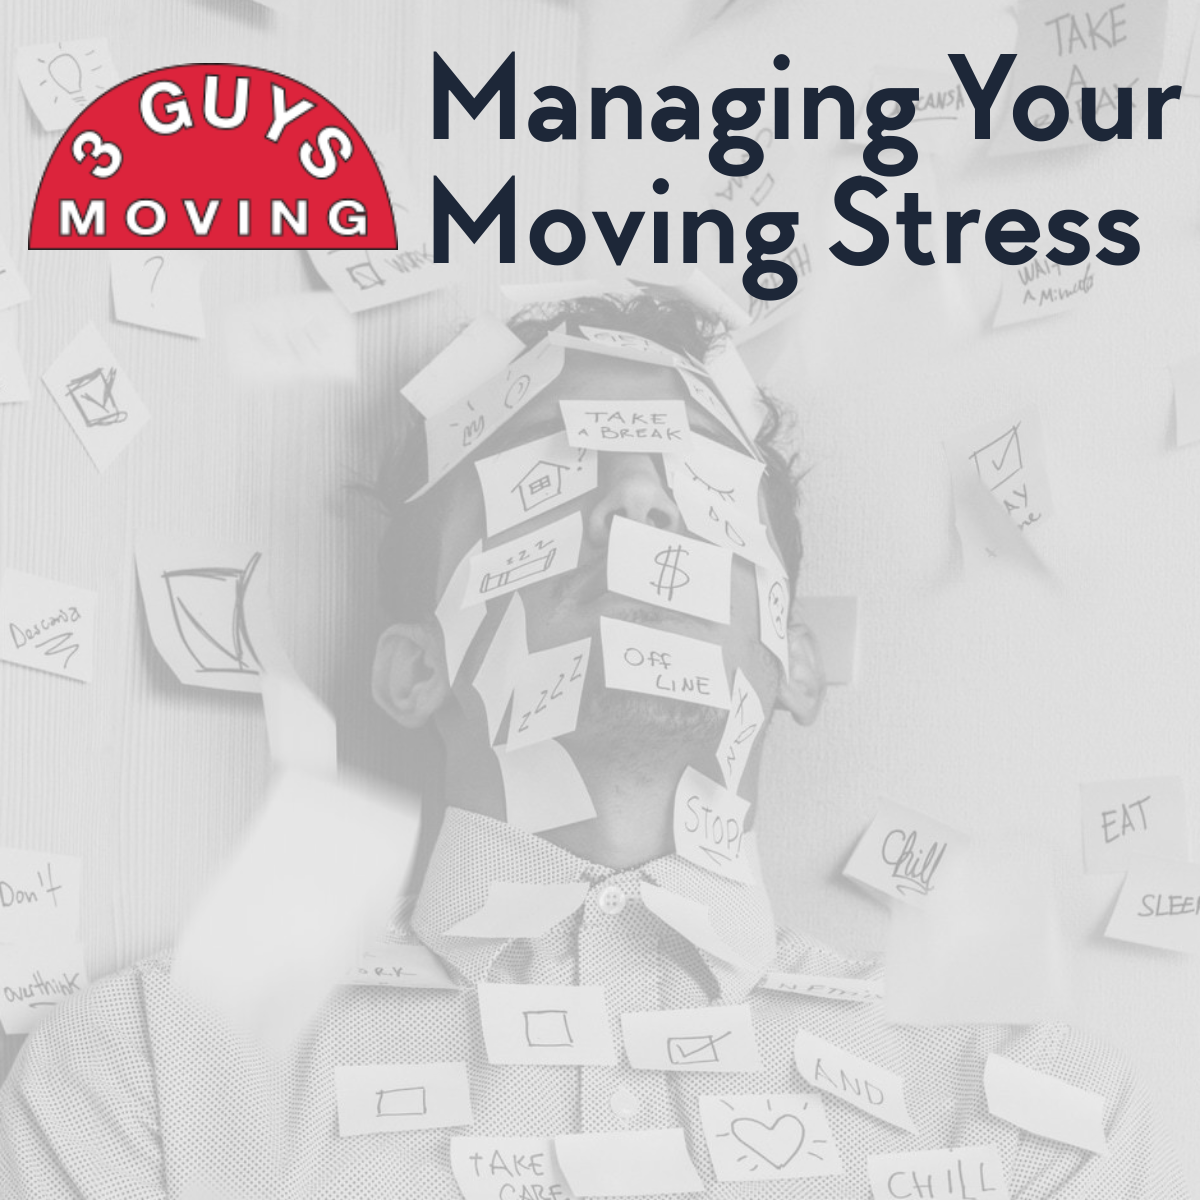 Managing Your Moving Stress - Managing Your Moving Stress